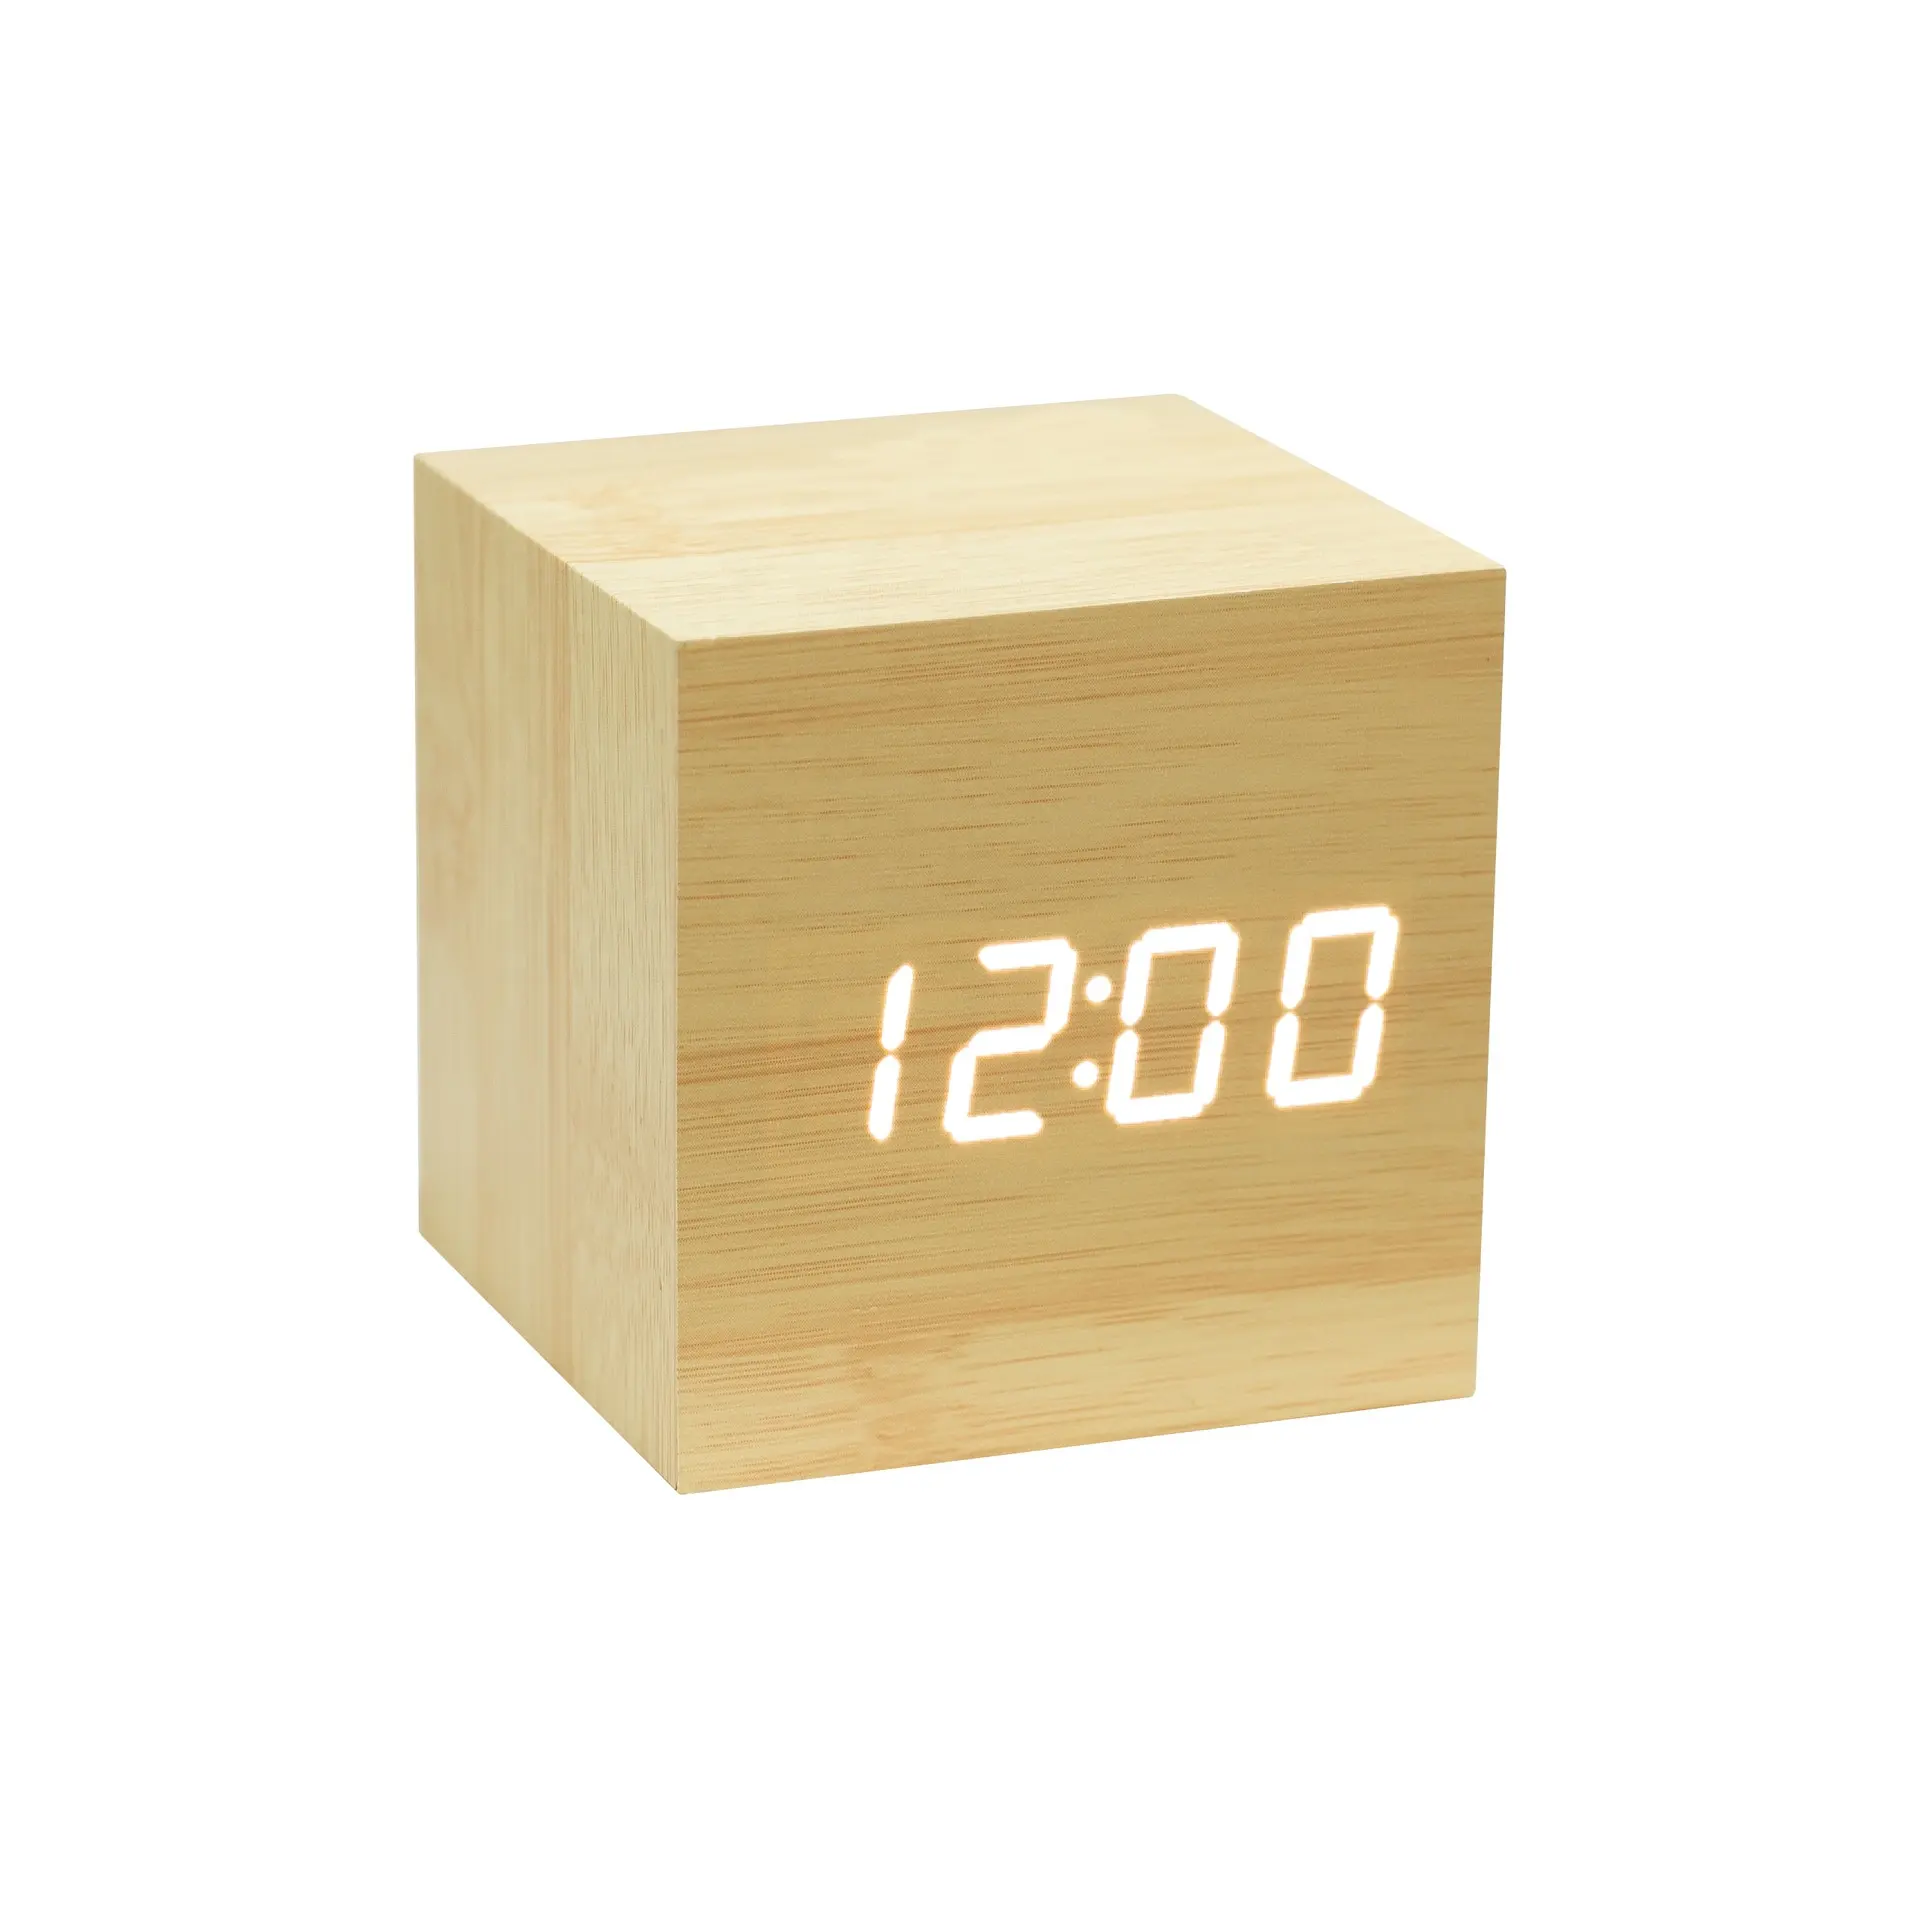 KH-WC001 Office Electronic Digital Cube Wooden LED Alarm Clock With Time Temperature Date Display